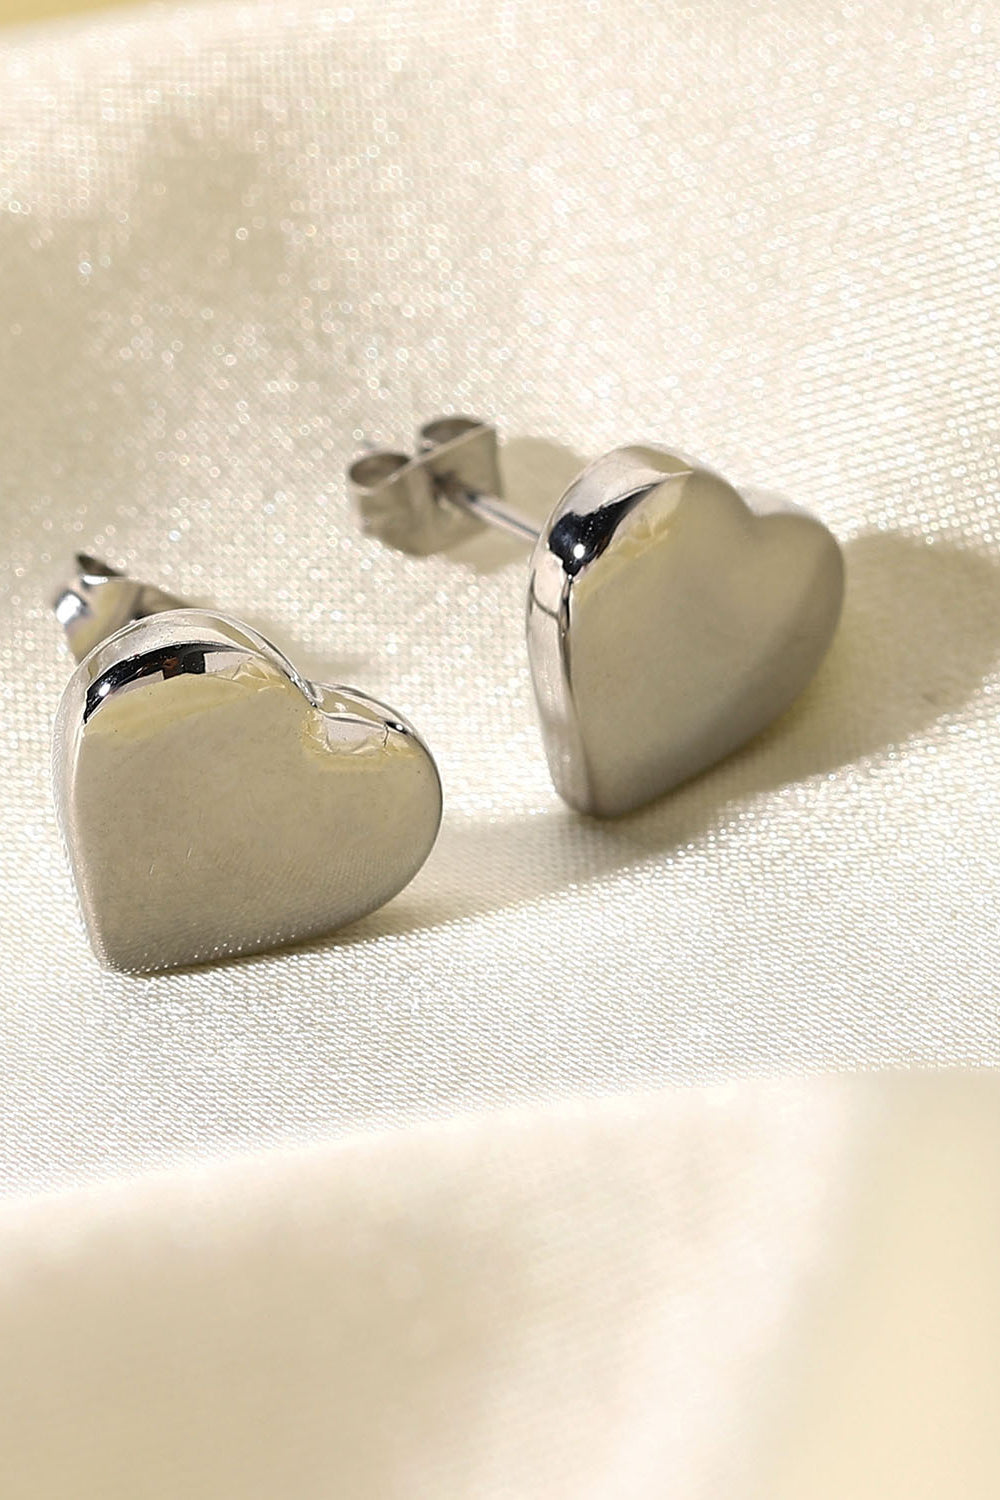 Stainless Steel Heart Stud Earrings Stainless Steel Heart Stud Earrings - M&R CORNER Trendsi Silver / One Size